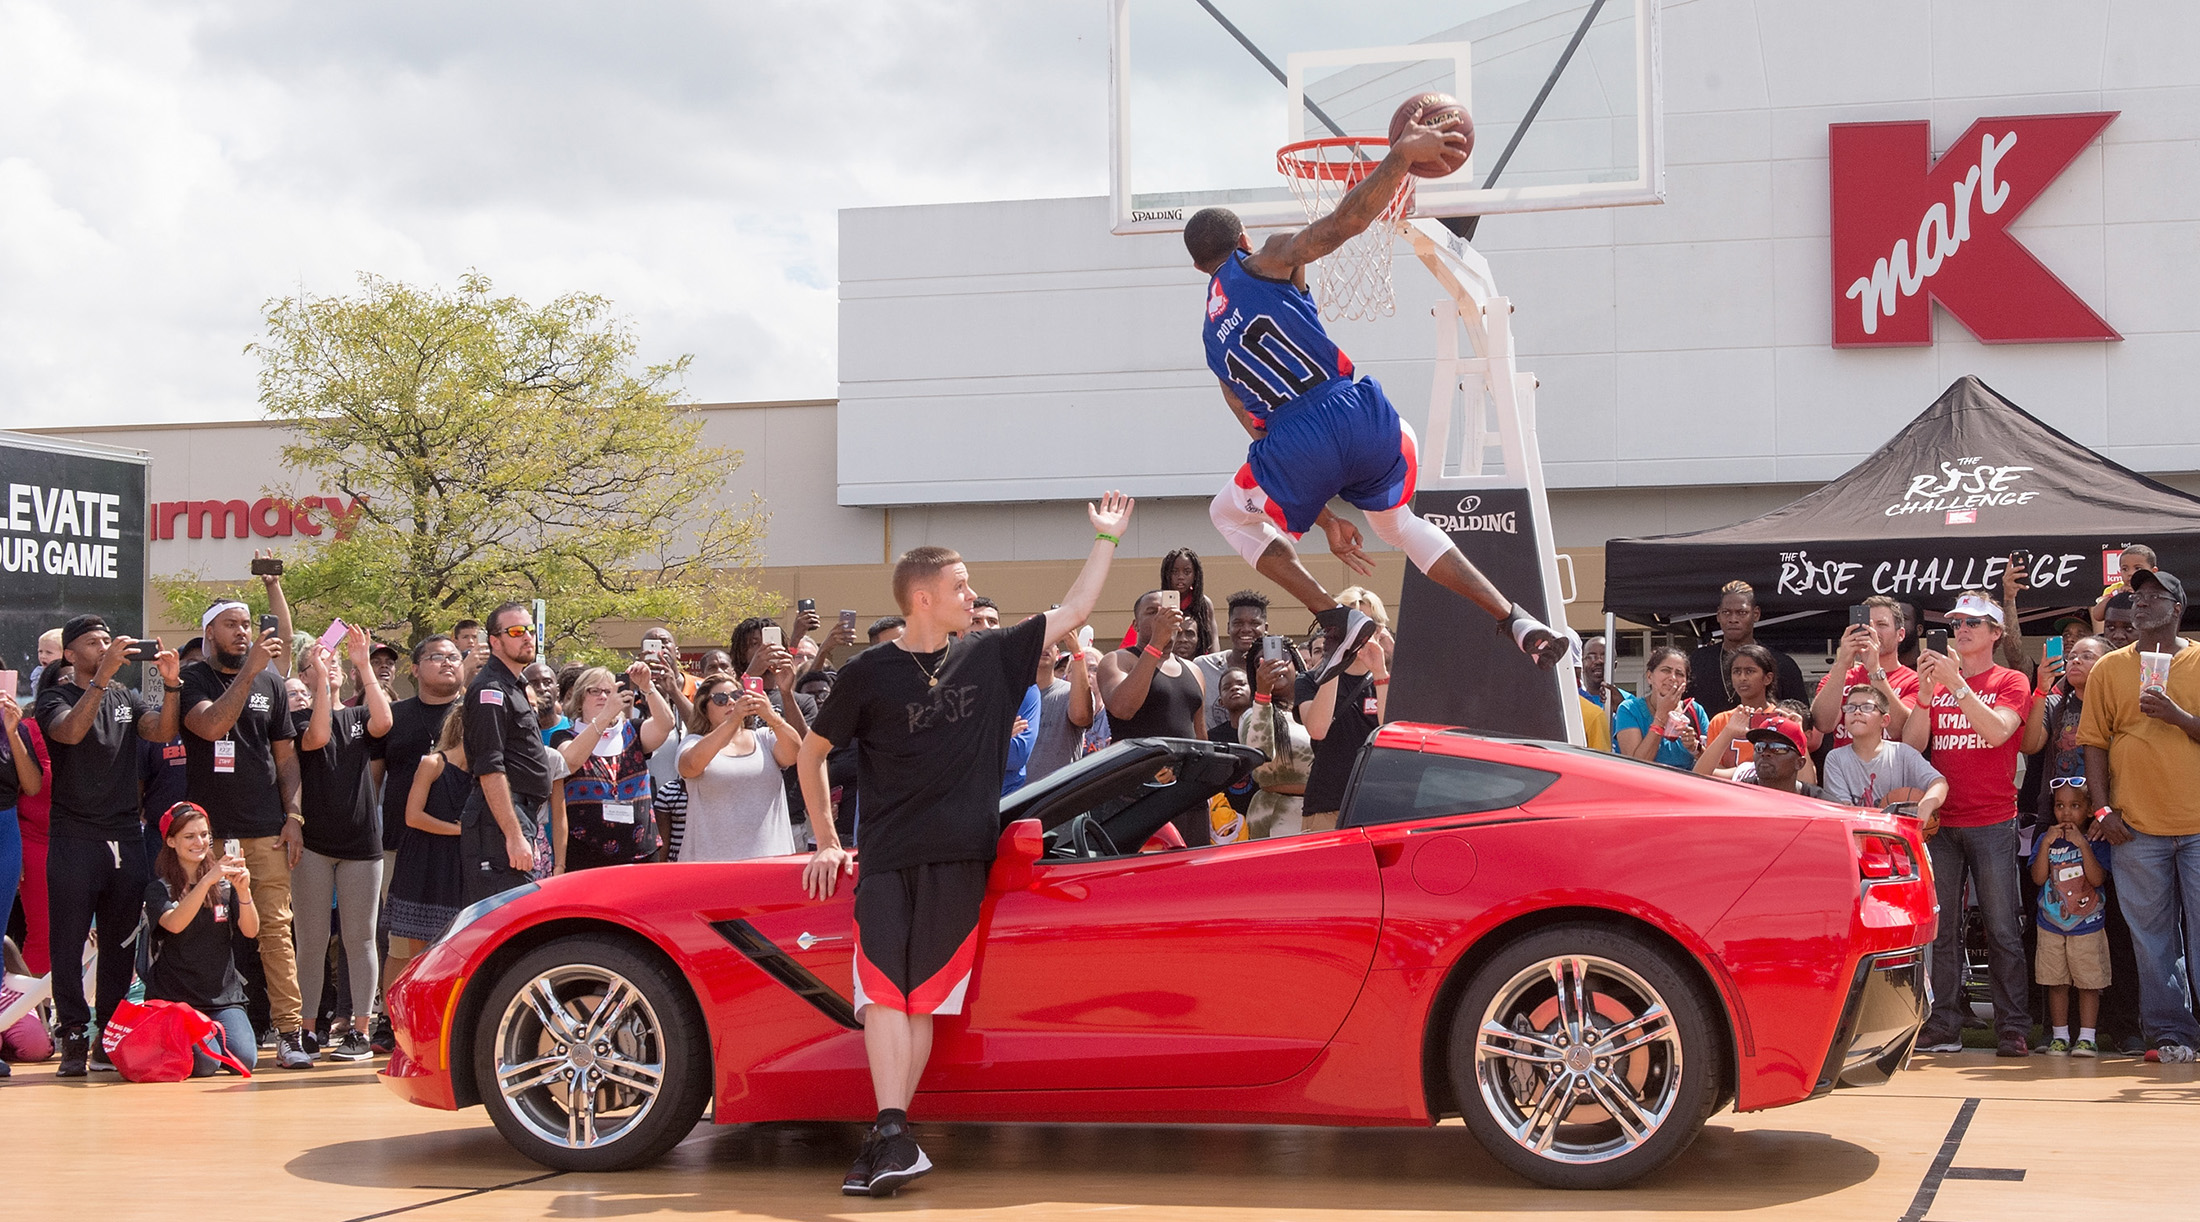 Kmart Woos Millennials With Concierge Service Scottie Pippen And